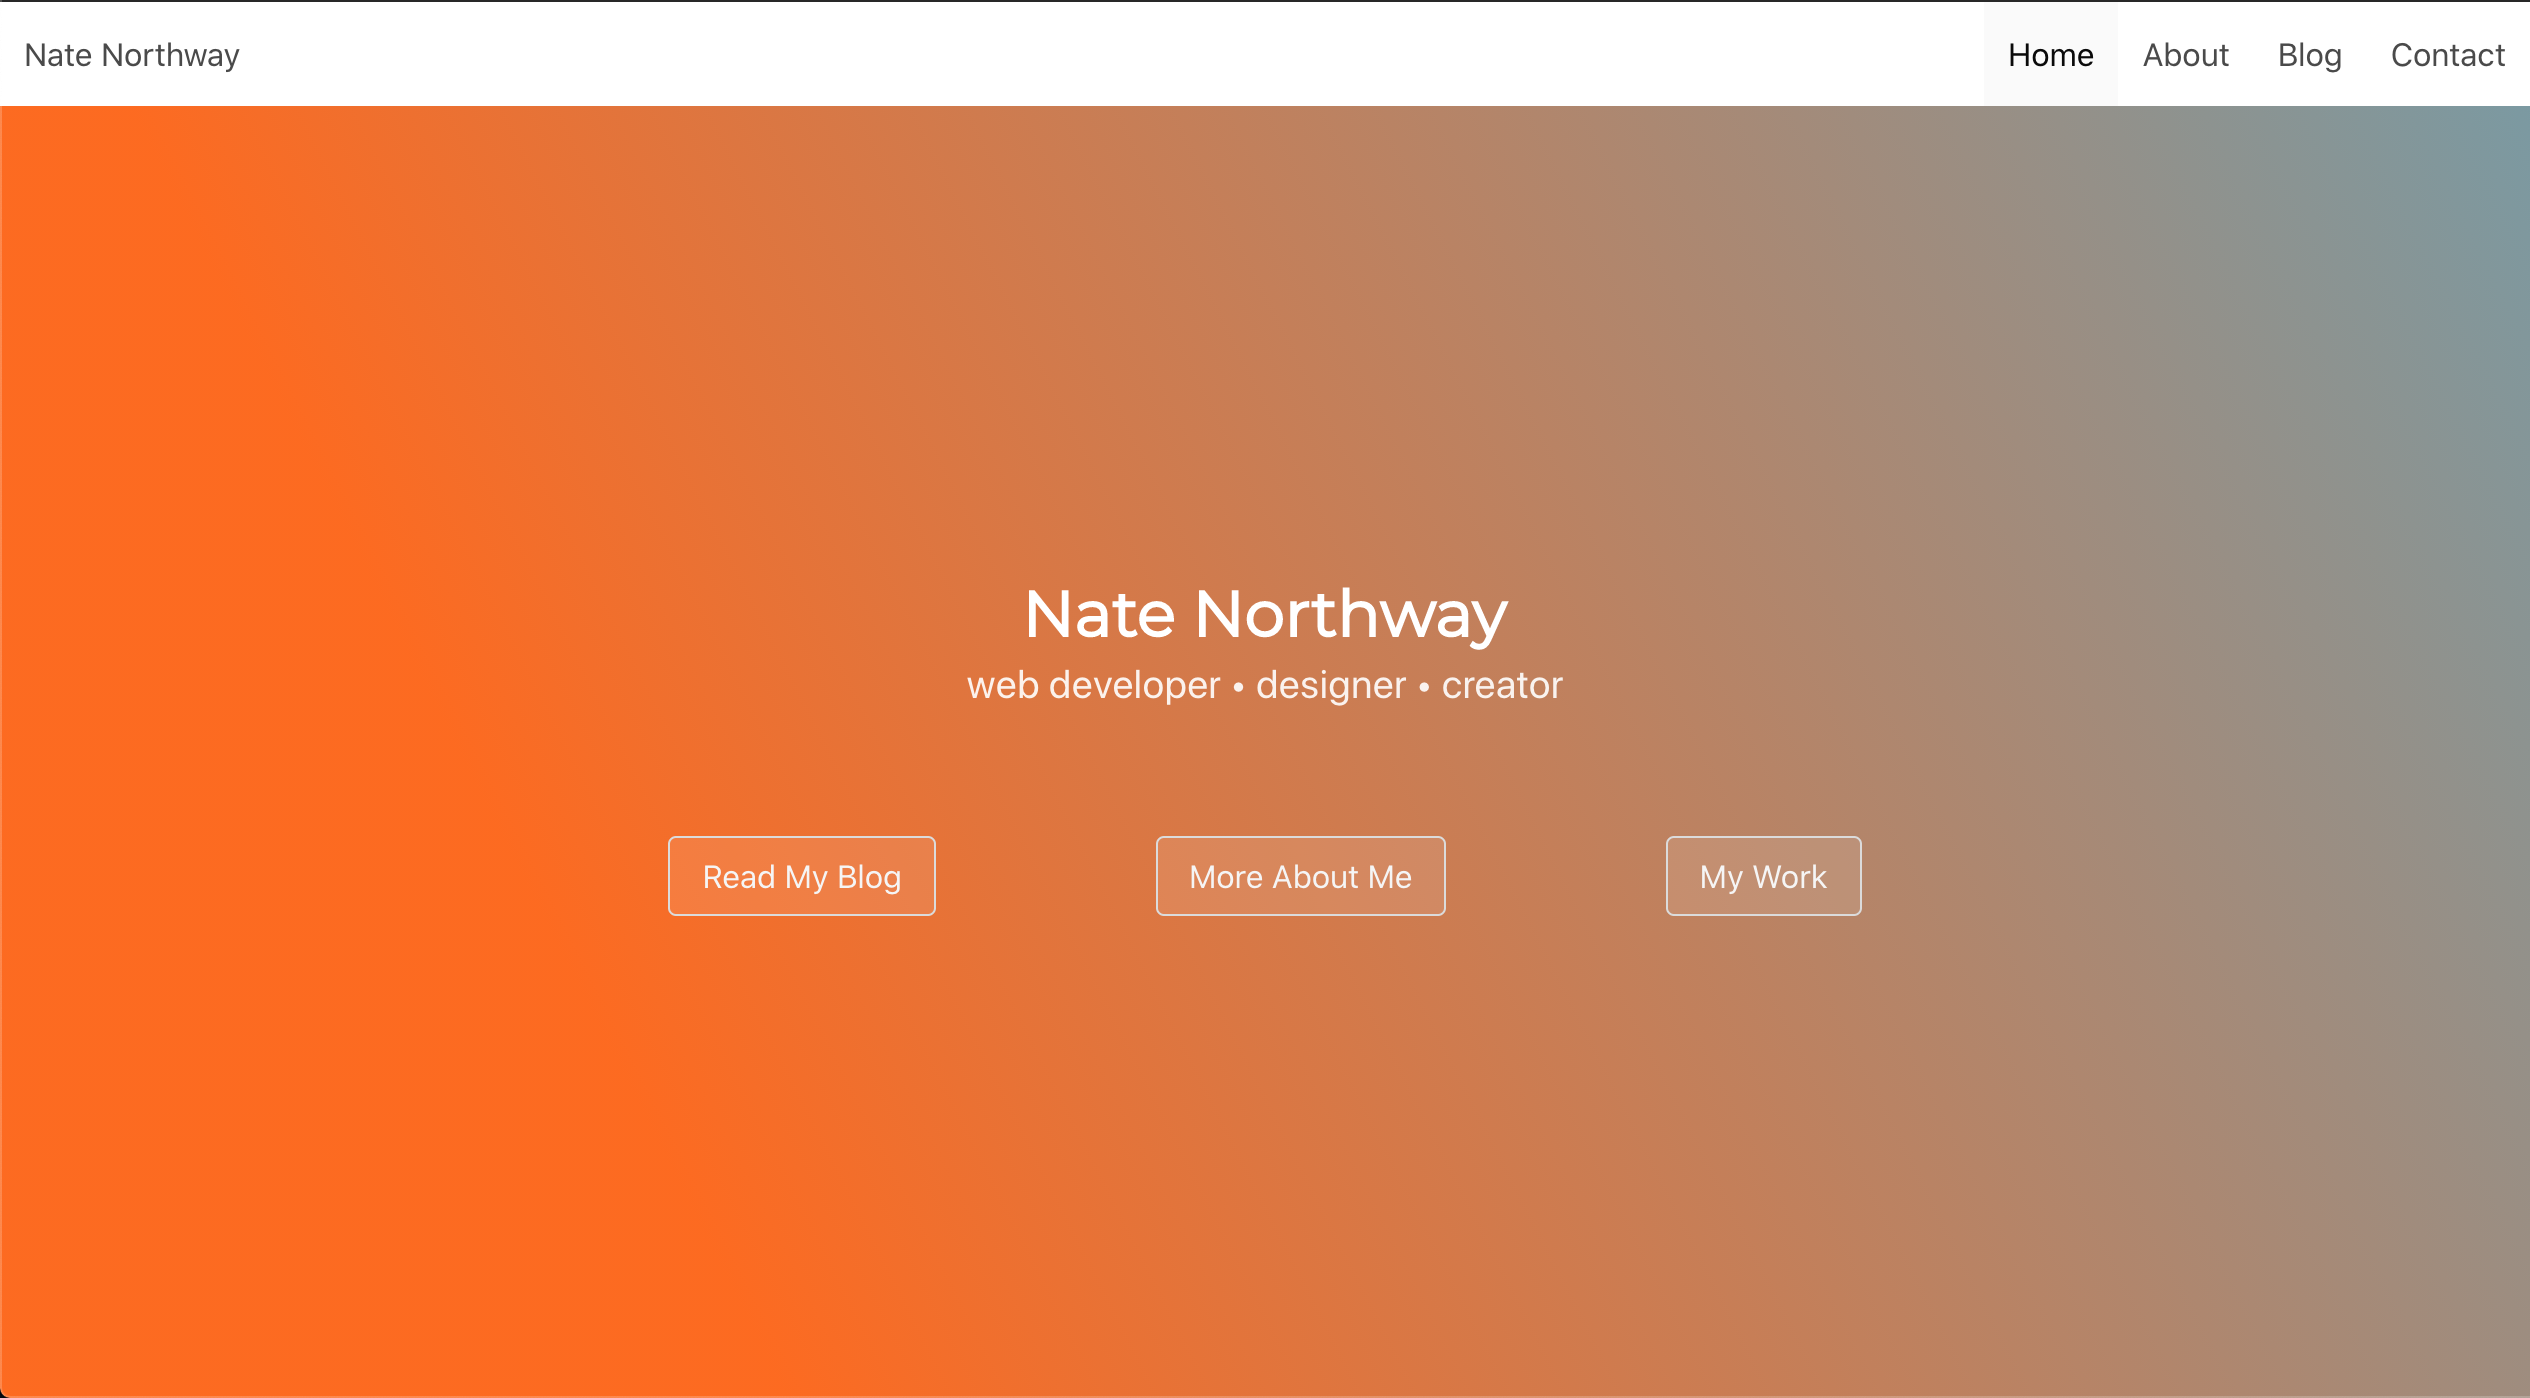 Nate Northway's Site Built With Topik